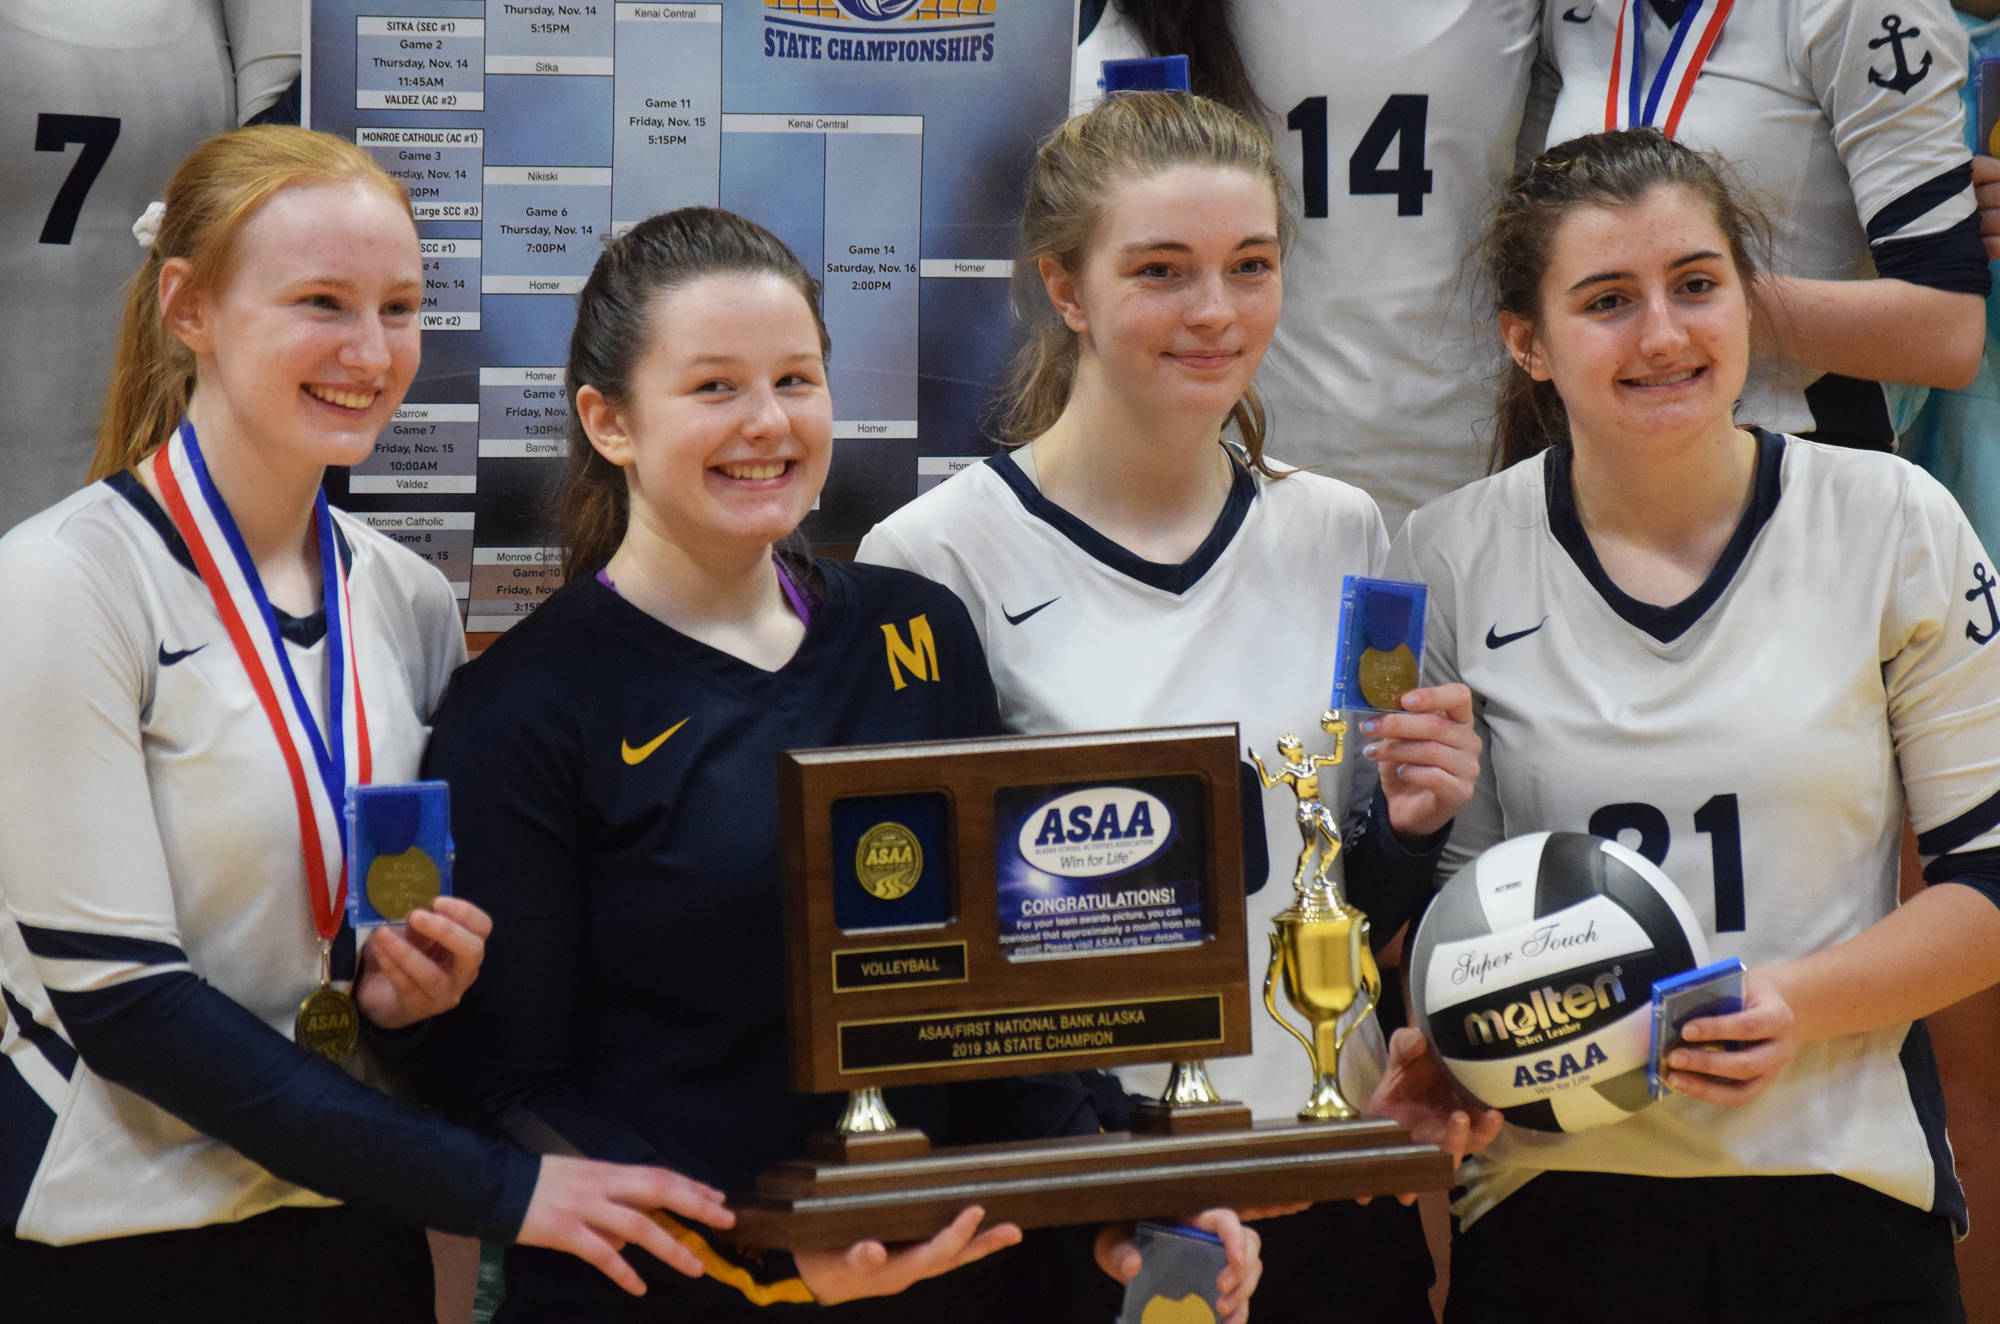 Members of the Homer volleyball team hold up the Class 3A state championship trophy Saturday, Nov. 16, 2019, at the Class 3A state volleyball tournament at the Alaska Airlines Center in Anchorage, Alaska. (Photo by Joey Klecka/Peninsula Clarion)